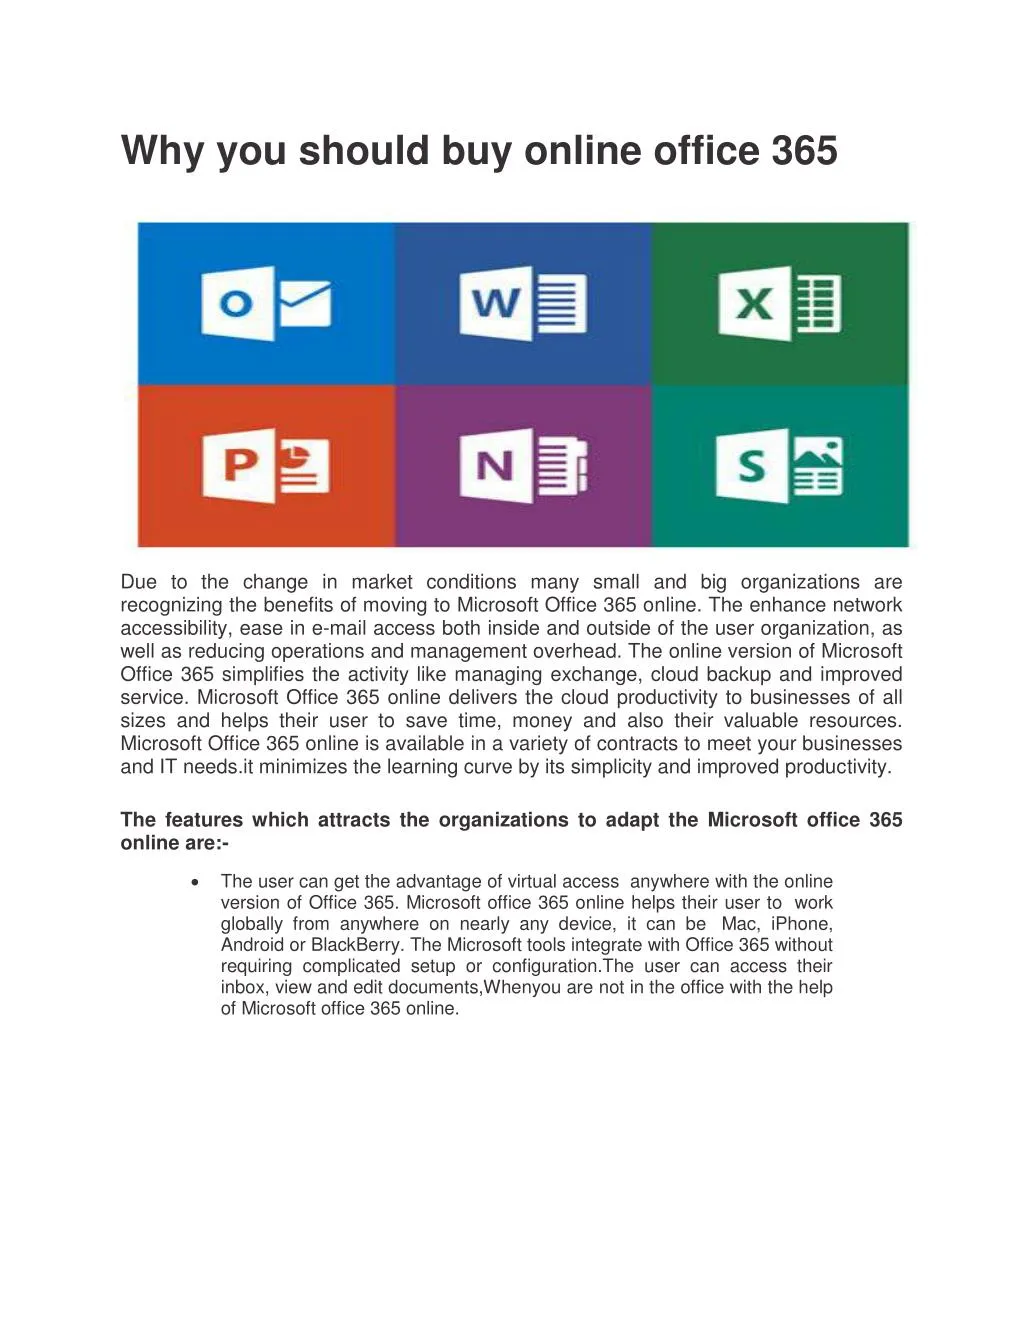 Ppt Why You Should Buy Online Office 365 Powerpoint Presentation Free Download Id